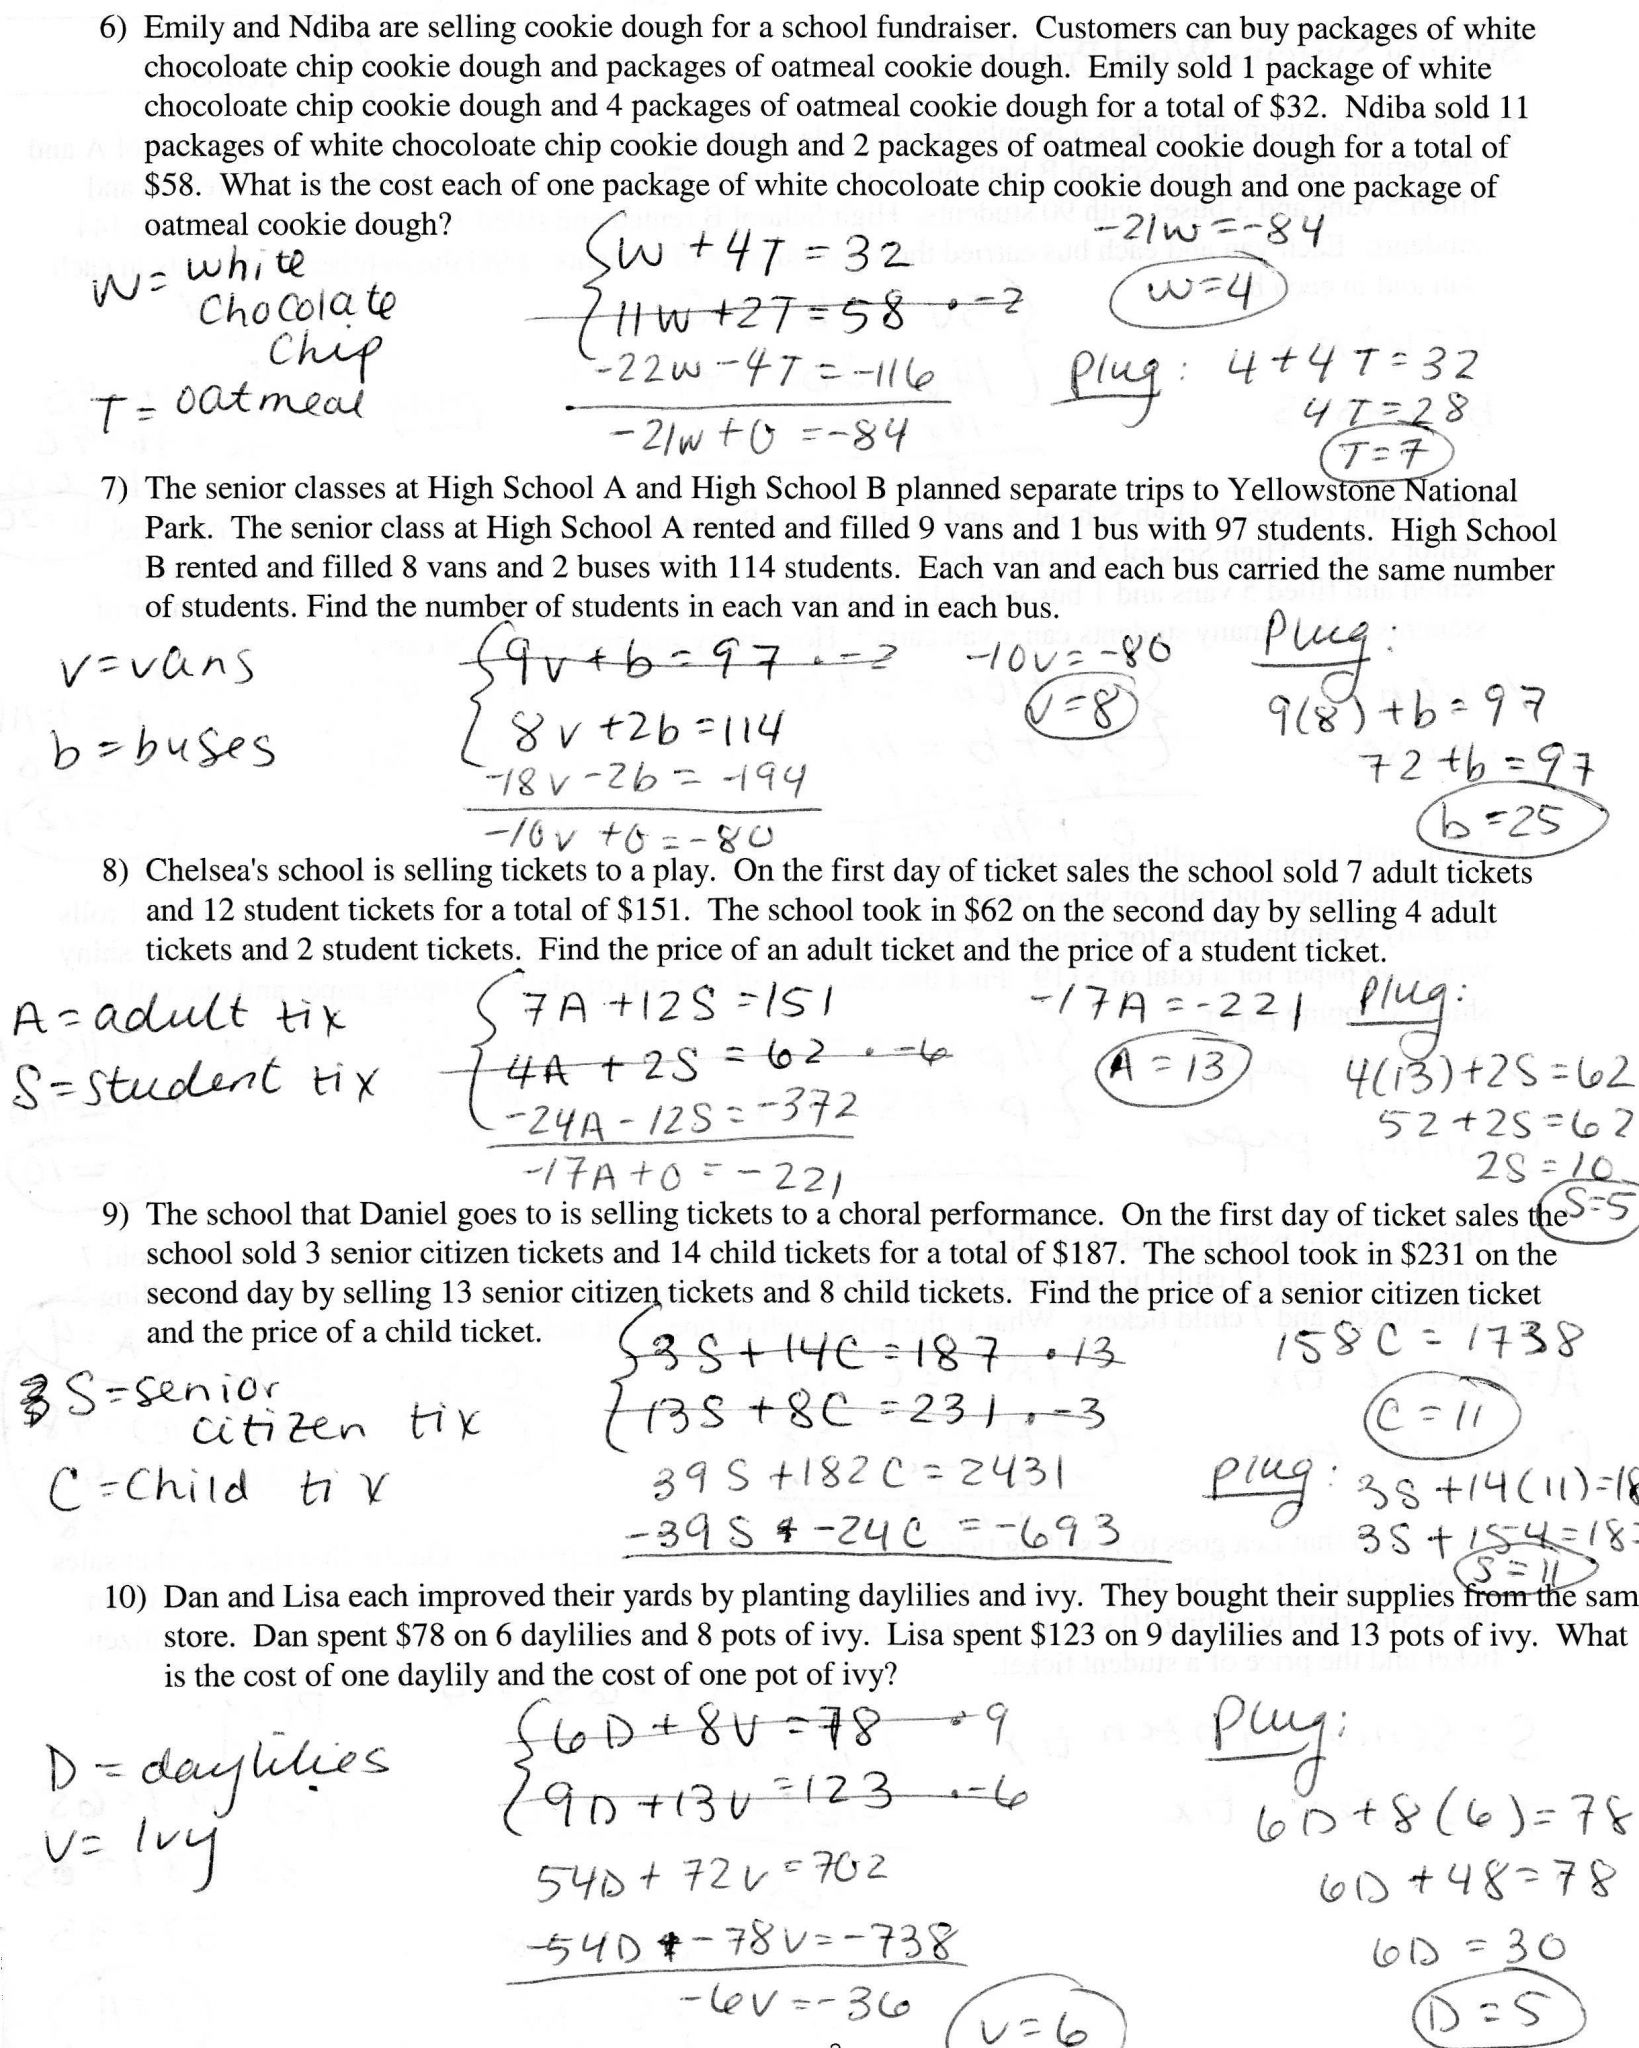 Forces Worksheet 1 Answer Key and Free Physical Science Worksheets Science Free Worksheet